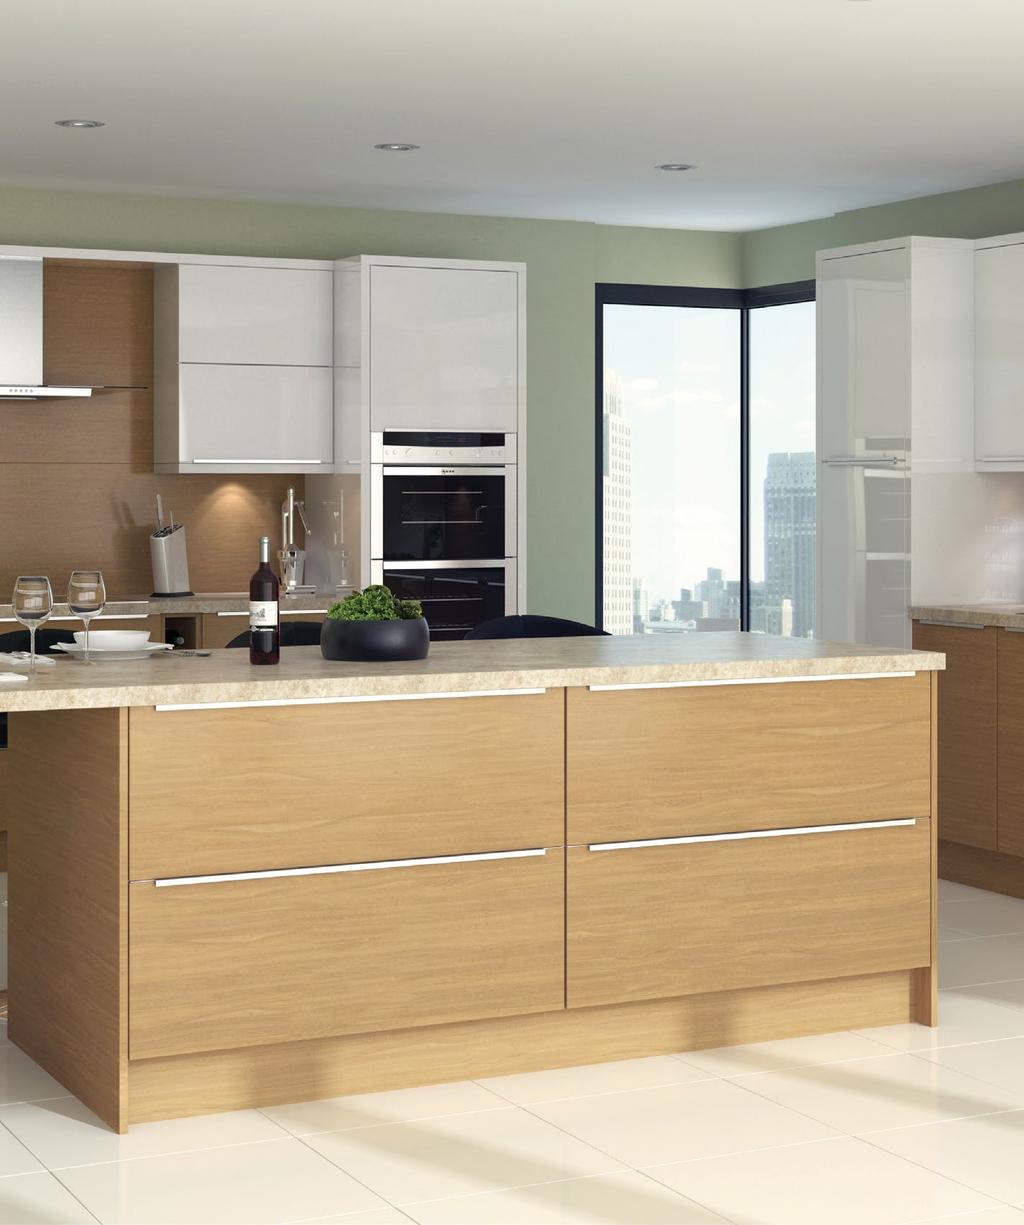 and contemporary slab-style kitchen suits a wide range of spaces.